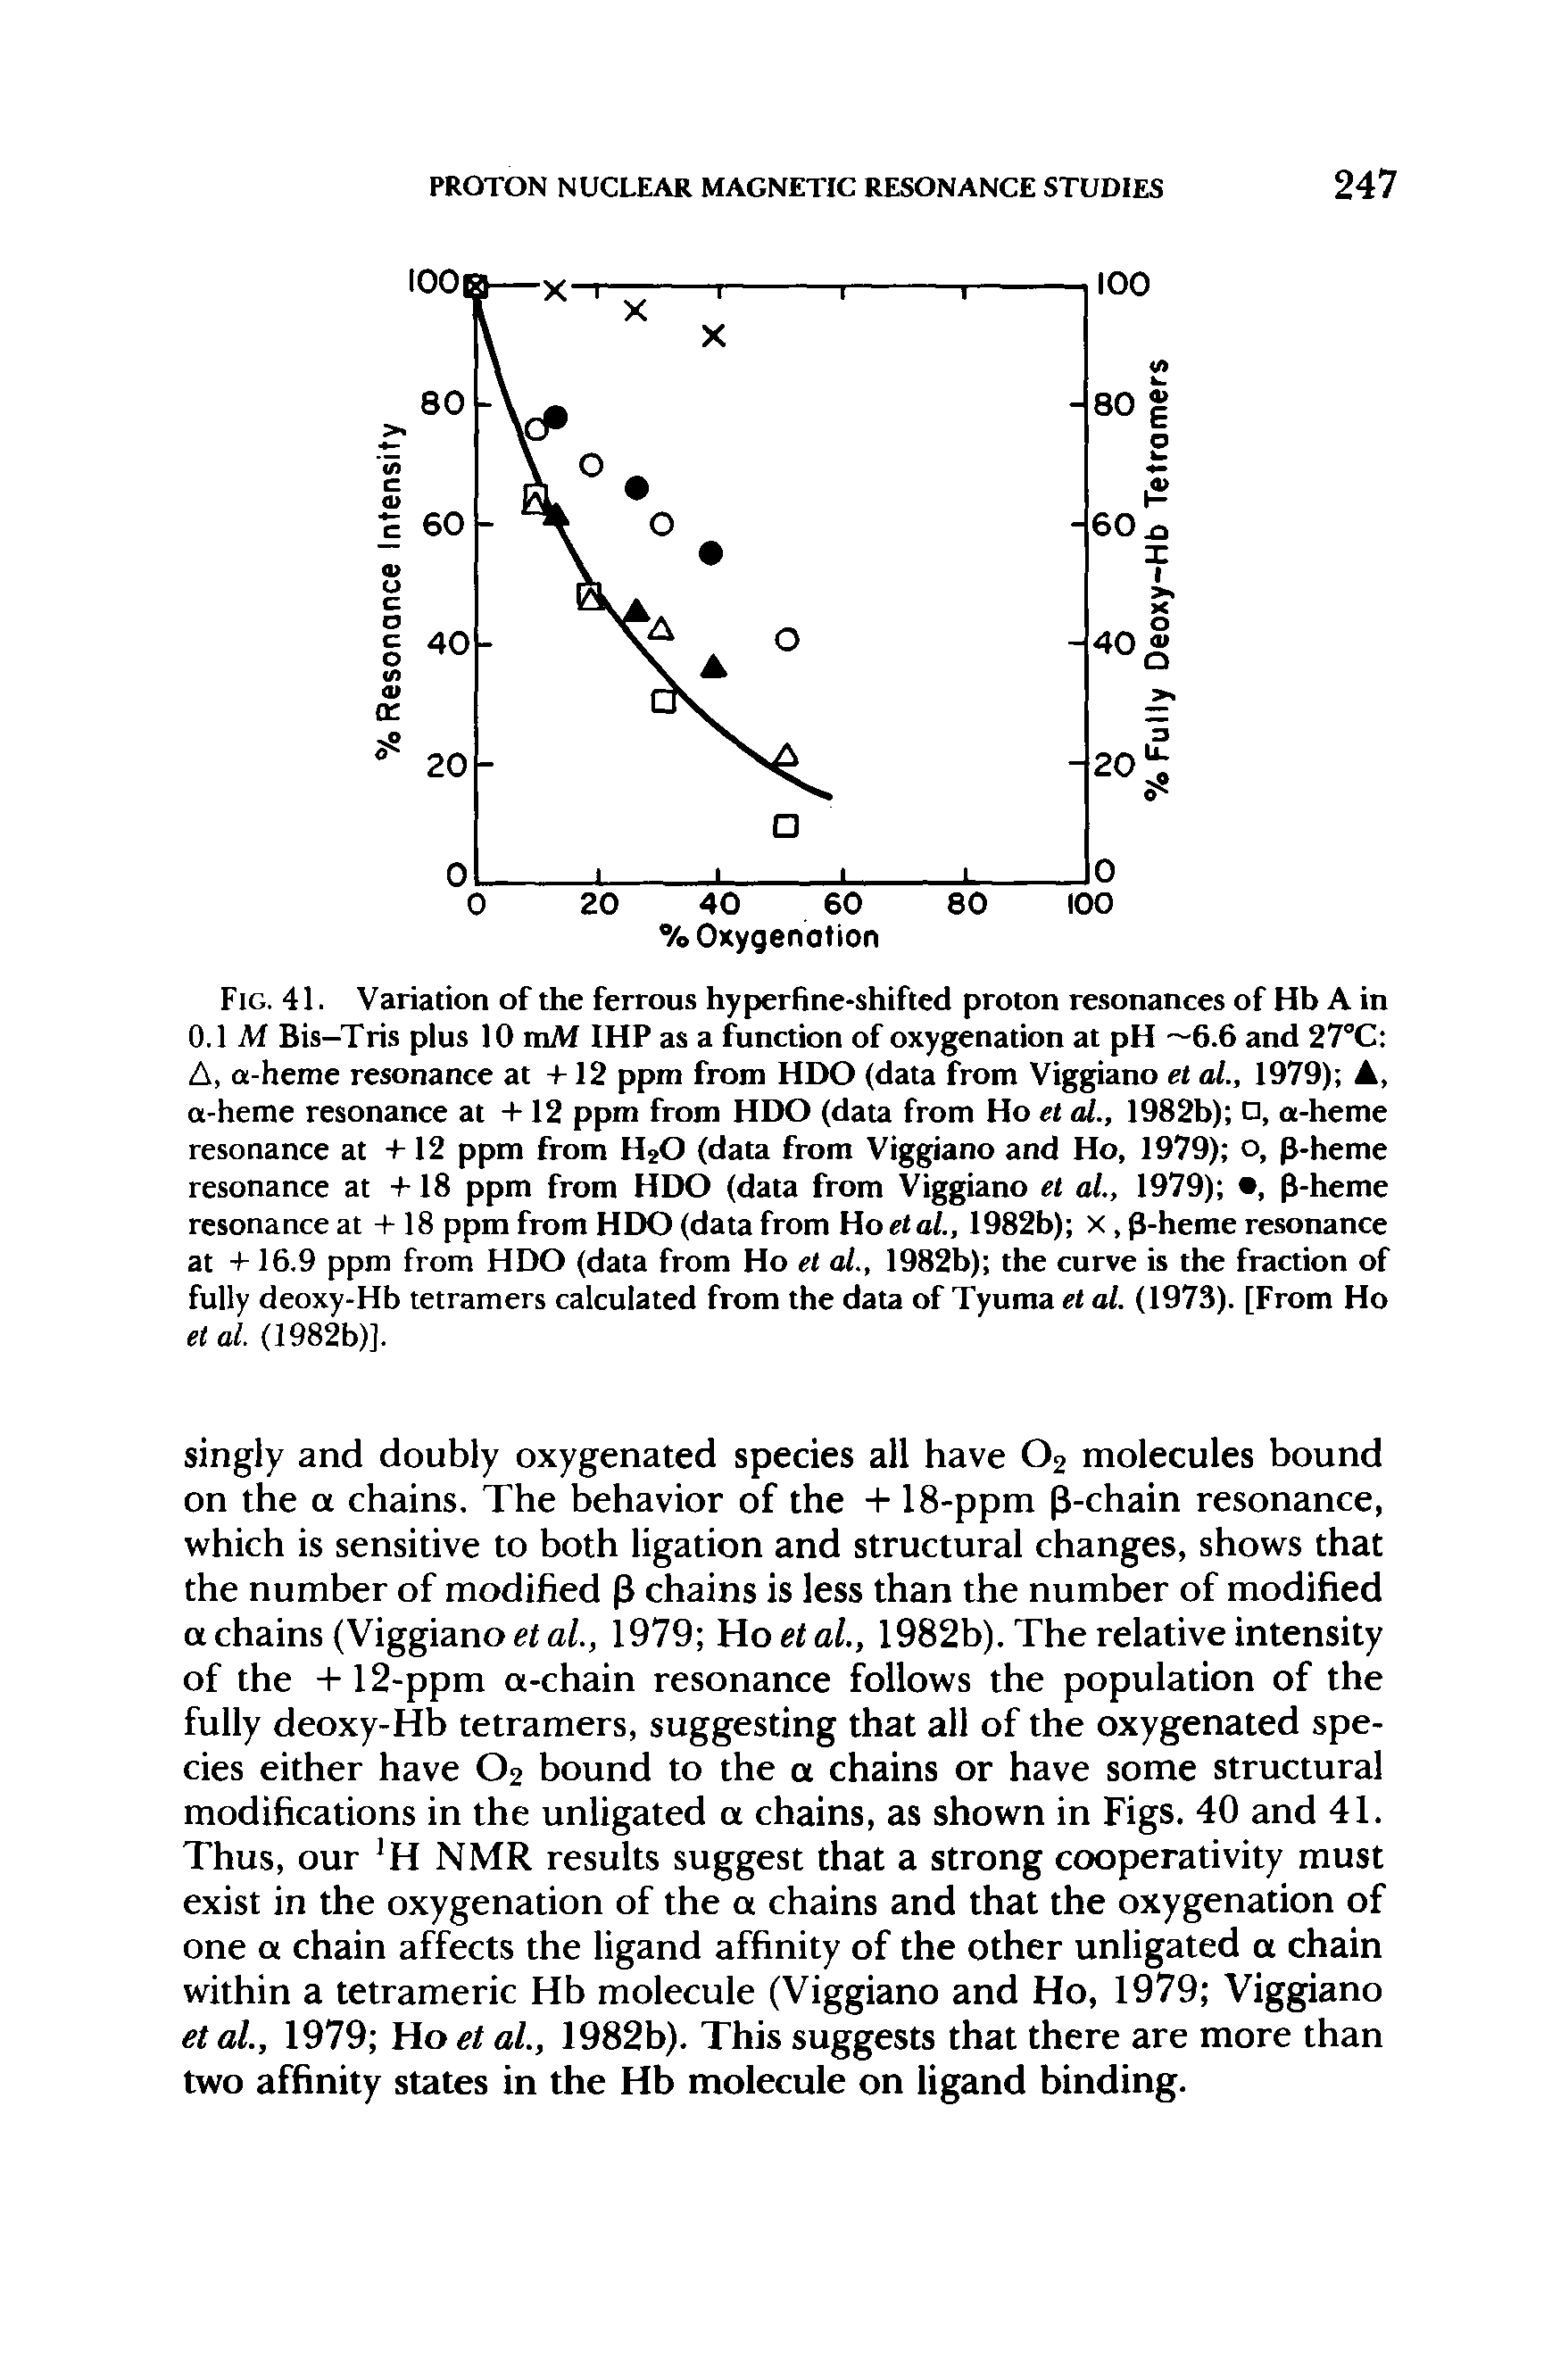 Fig. 41. Variation of the ferrous hyperfine-shifted proton resonances of Hb A in 0.1 M Bis-Tris plus 10 mM IHP as a function of oxygenation at pH 6.6 and 27°C A, a-heme resonance at +12 ppm from HDO (data from Viggiano et al., 1979) , a-heme resonance at + 12 ppm from HDO (data from Ho et al., 1982b) , a-heme resonance at + 12 ppm from H20 (data from Viggiano and Ho, 1979) o, p-heme resonance at +18 ppm from HDO (data from Viggiano et al., 1979) , p-heme resonance at + 18 ppm from HDO (data from Hoetal., 1982b) x, p-heme resonance at + 16.9 ppm from HDO (data from Ho et al., 1982b) the curve is the fraction of fully deoxy-Hb tetramers calculated from the data of Tyuma et al. (1973). [From Ho et al. (1982b)].